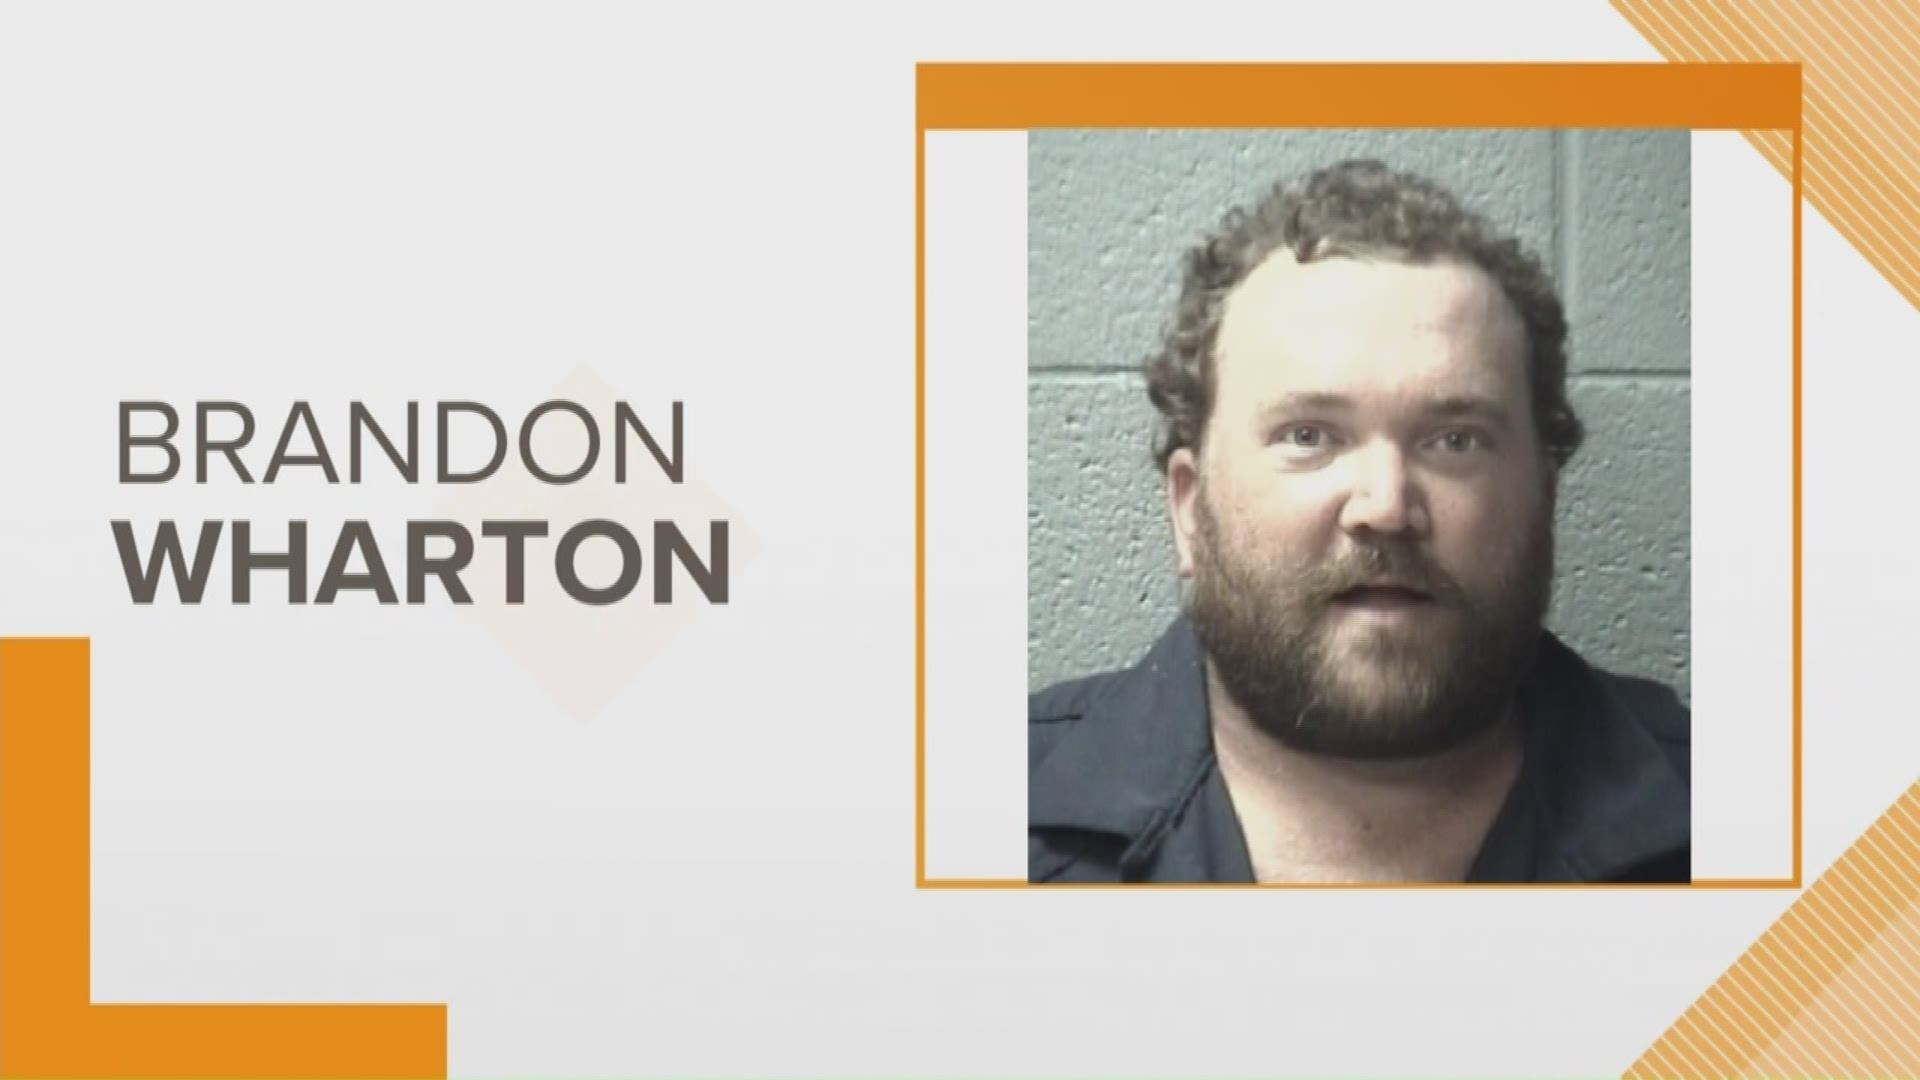 Brandon Wharton, 36, of Sumter has been charged after taking up to $37,000 for construction work that he never started.